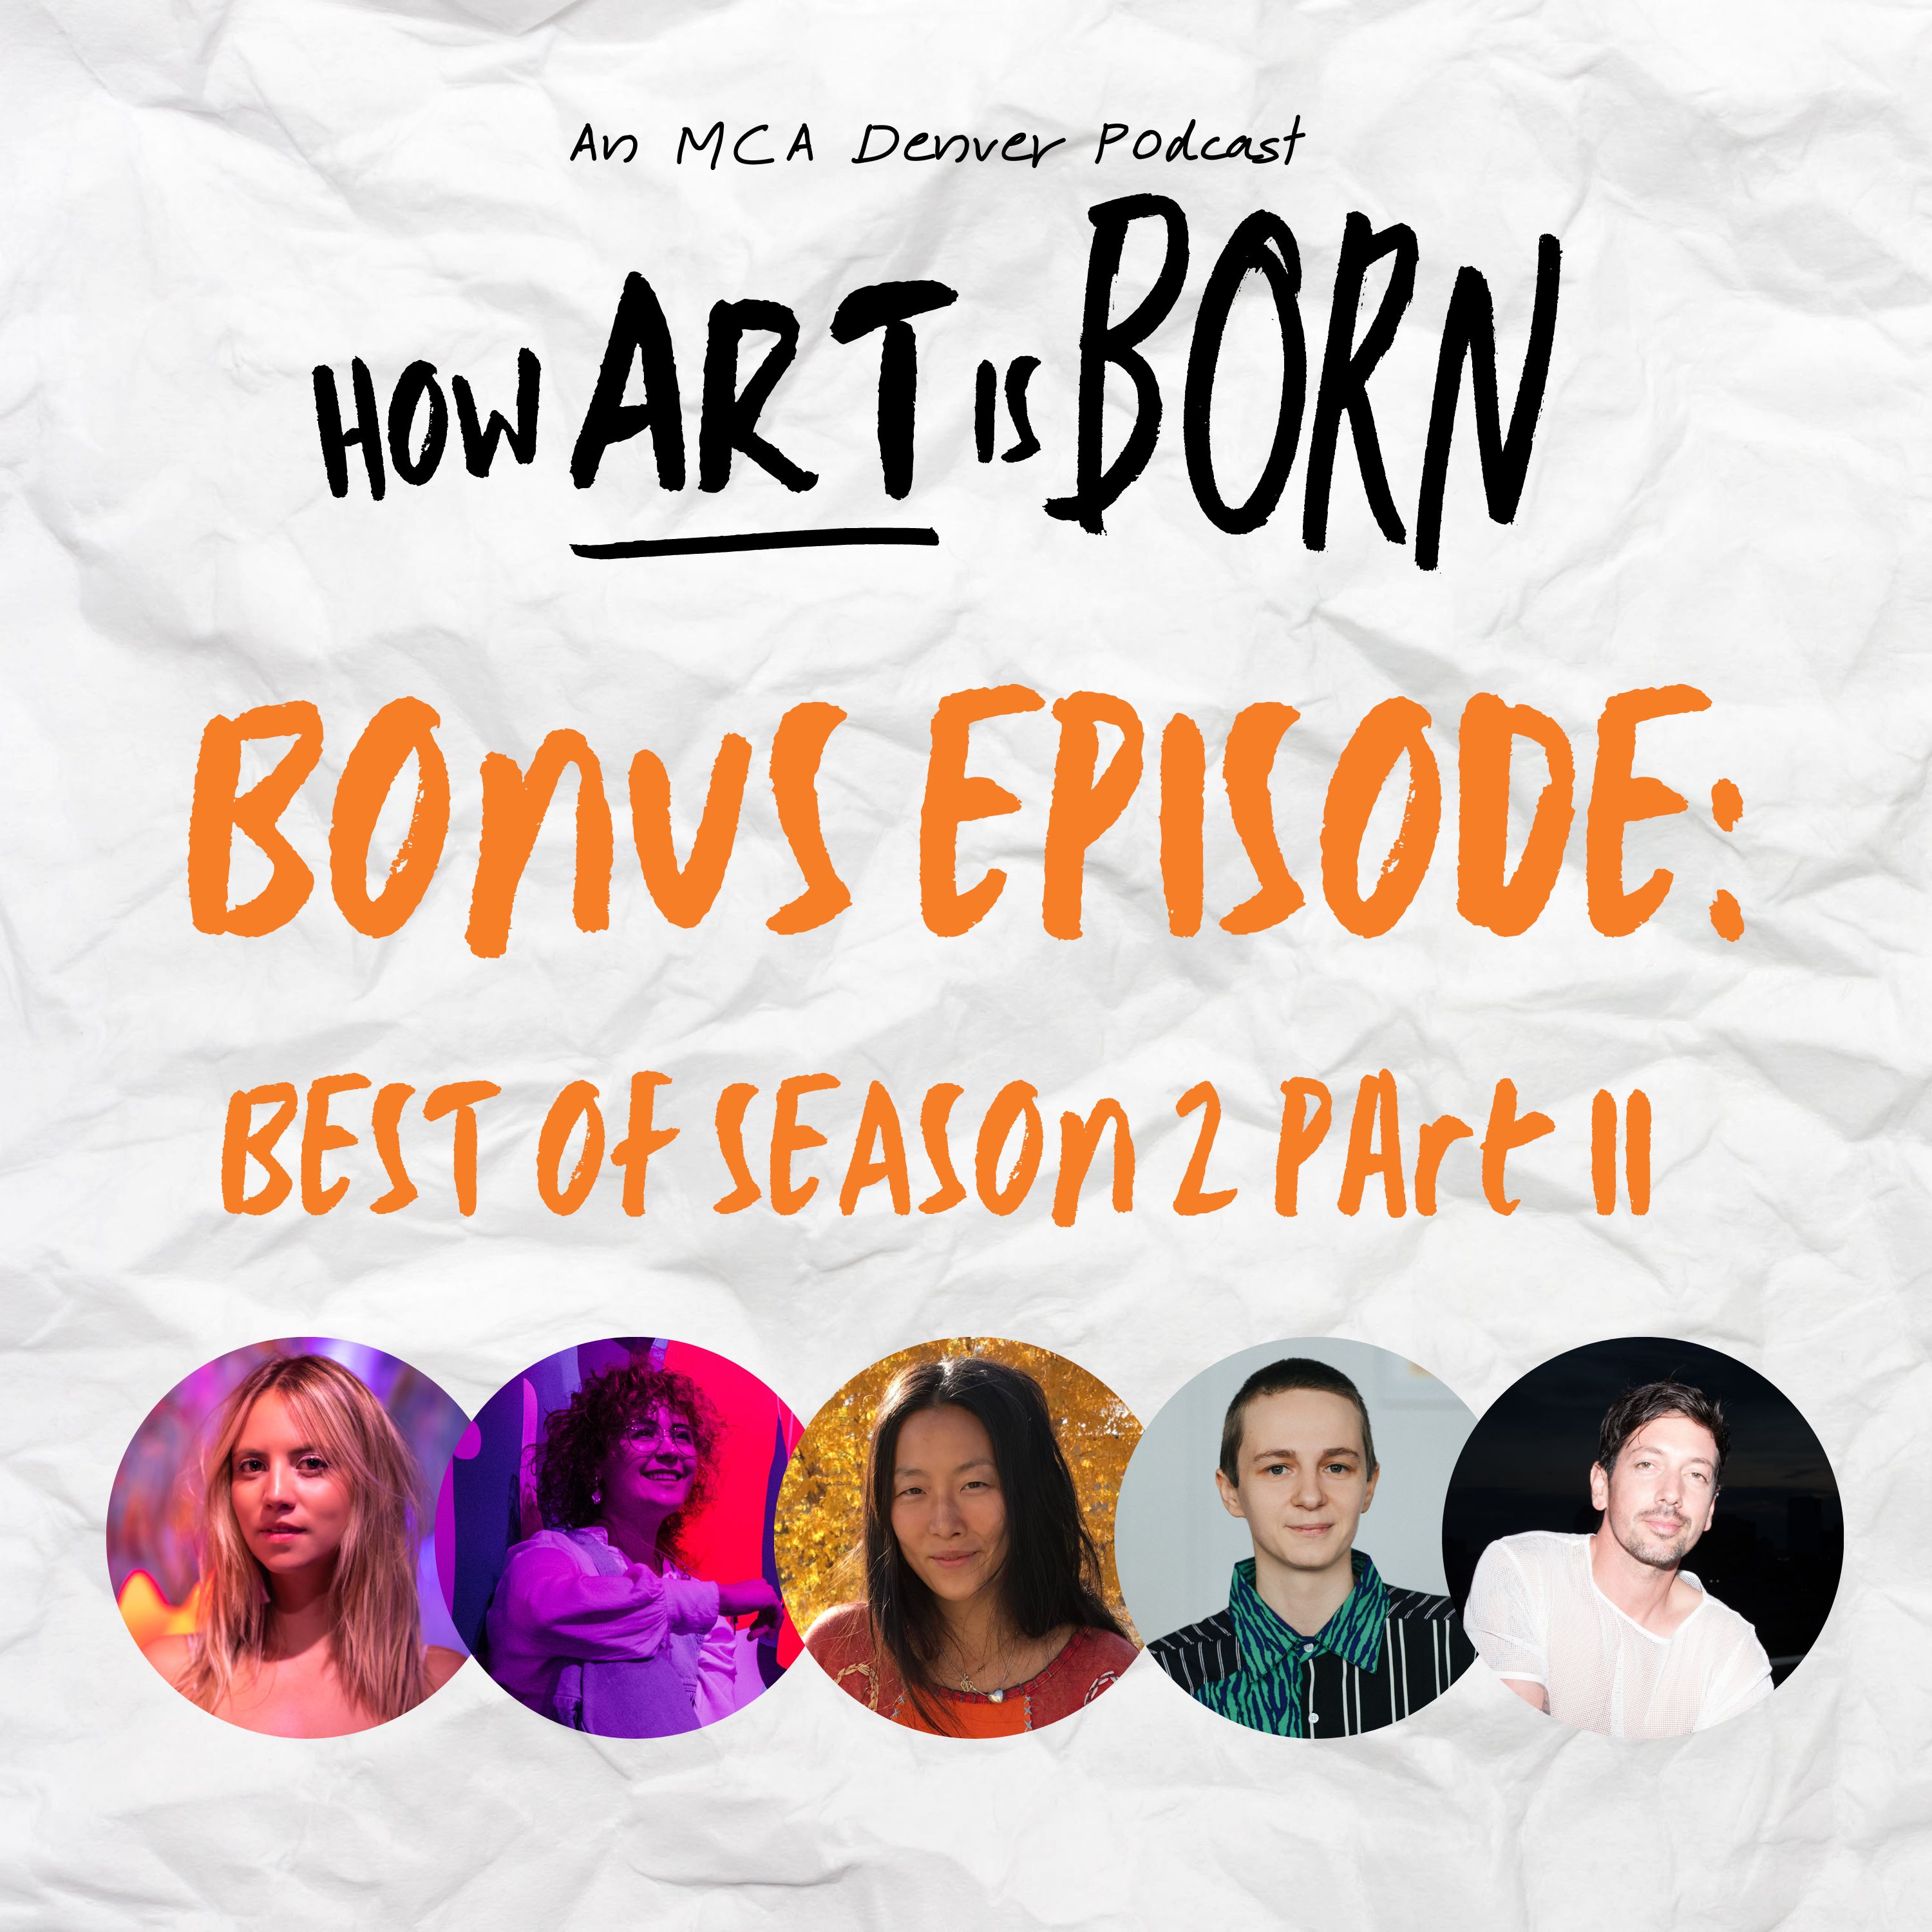 Image with text. A crumpled white piece of paper as background with the text "How Art is Born. Bonus Episode: Best of Season 2 Part II". Below the text are headshots of guests Cami Galofre, Sofie Birkin, Maia Ruth Lee, Finnegan Shannon, and Eric See.